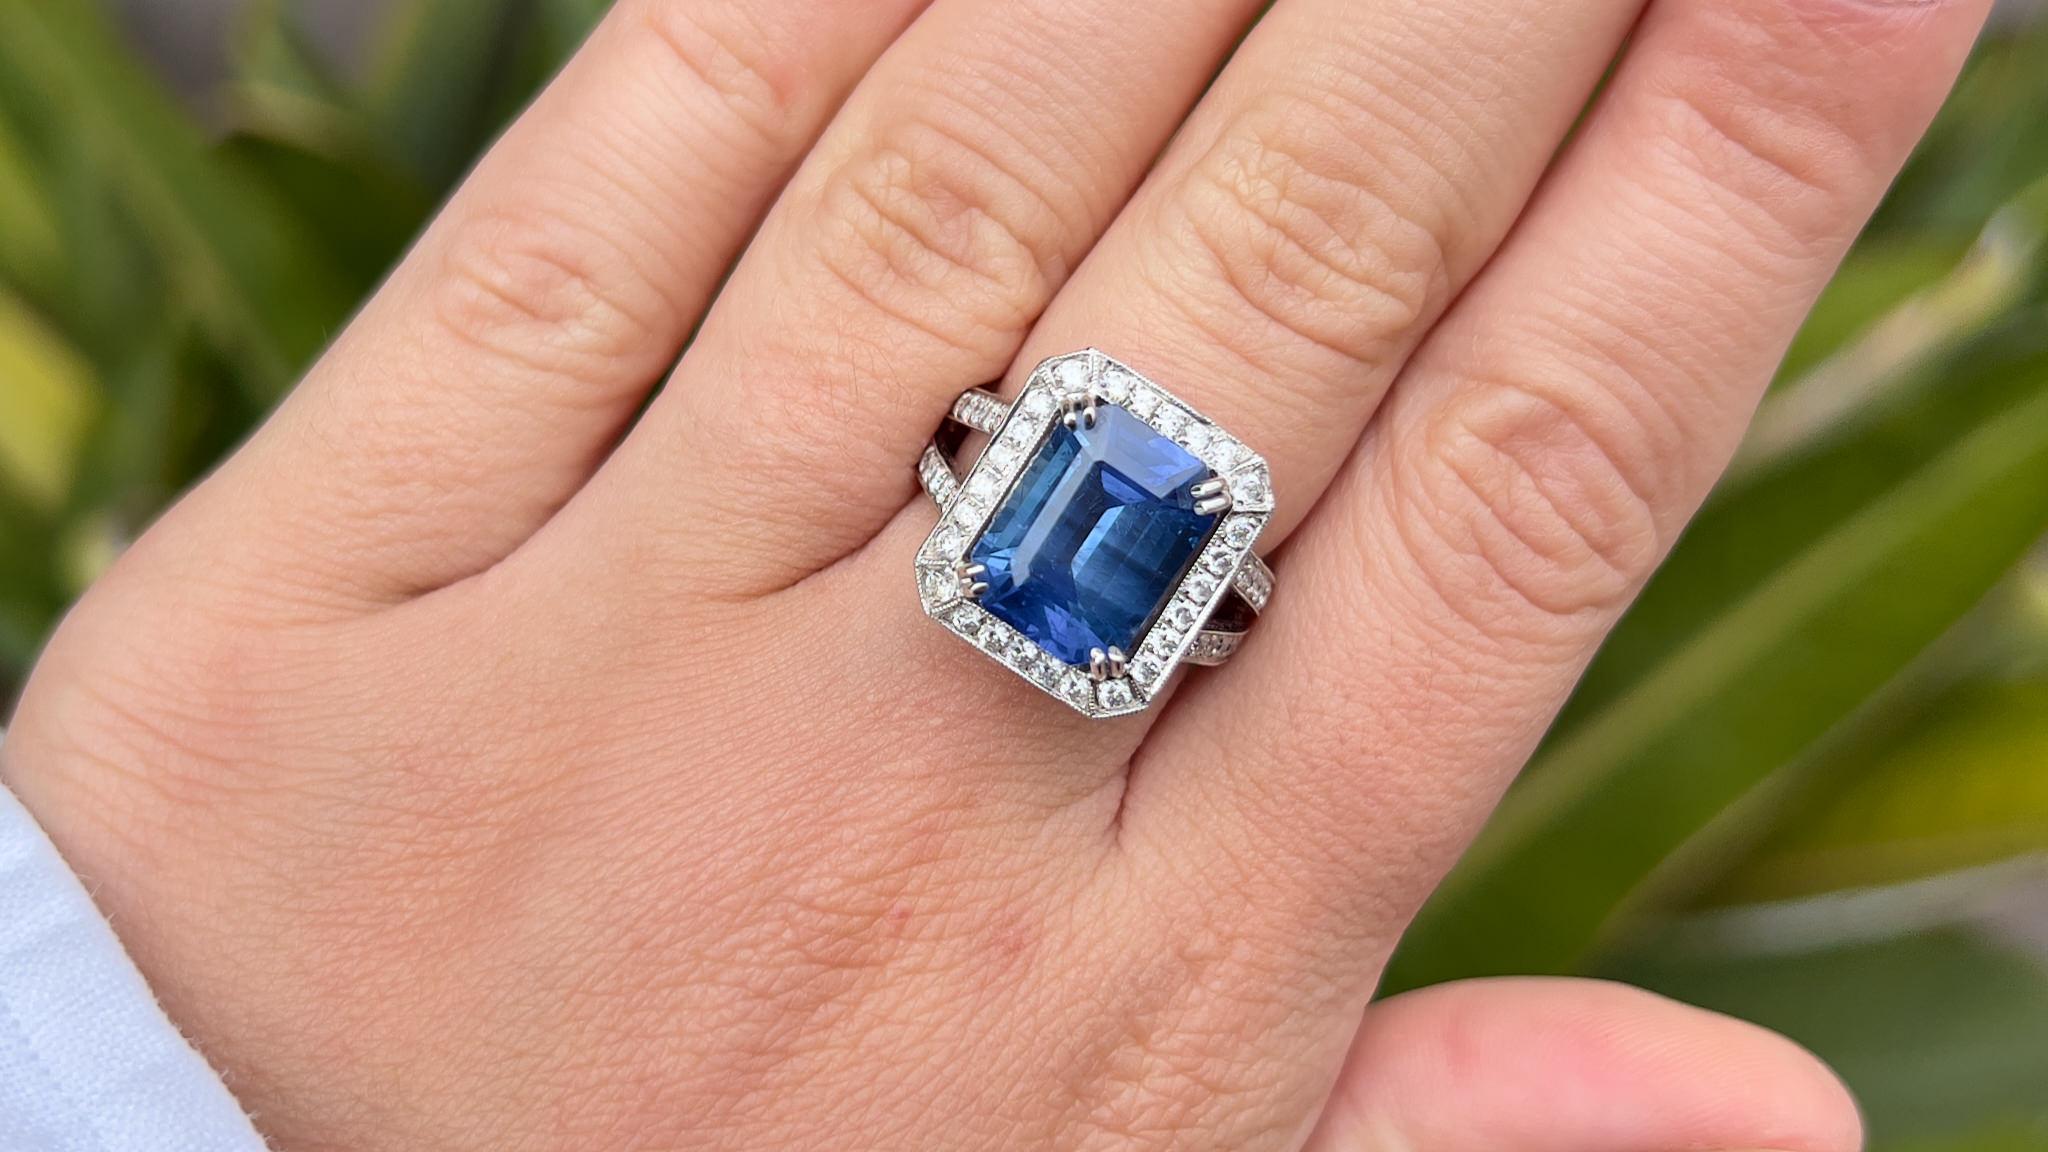 Sapphire = 6.50 Carat
Cut: Emerald
Diamonds = 2.85 Carats
( Color: F, Clarity: VS )
Metal: 18K Gold
Size: 6.25 US*
*It can be resized complimentary